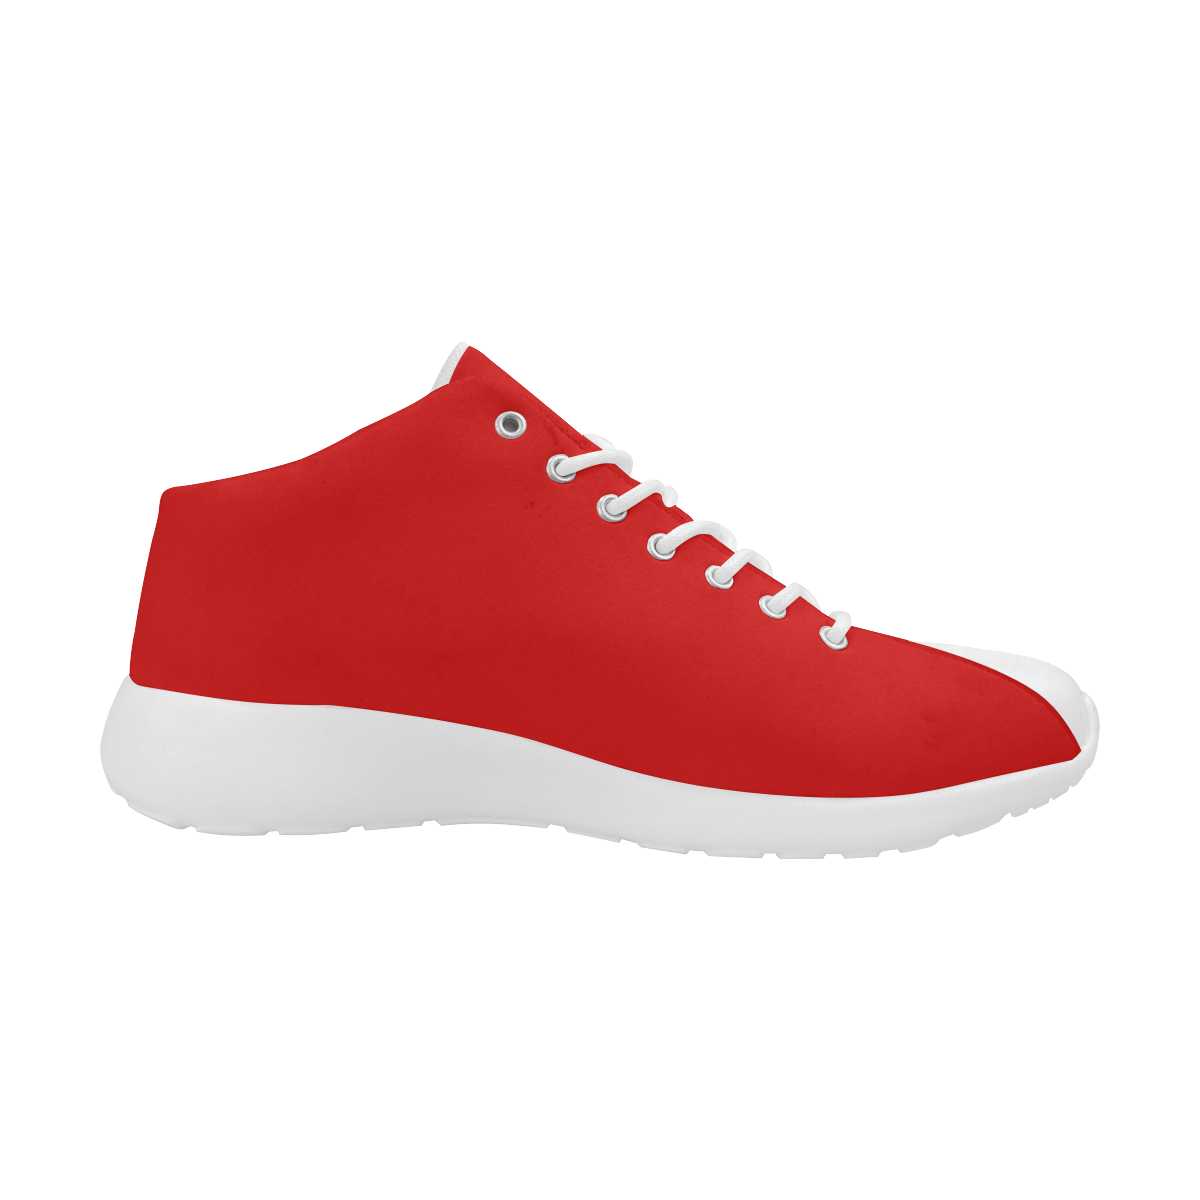 Ravishing Red Solid Colored Women's Basketball Training Shoes/Large Size (Model 47502)